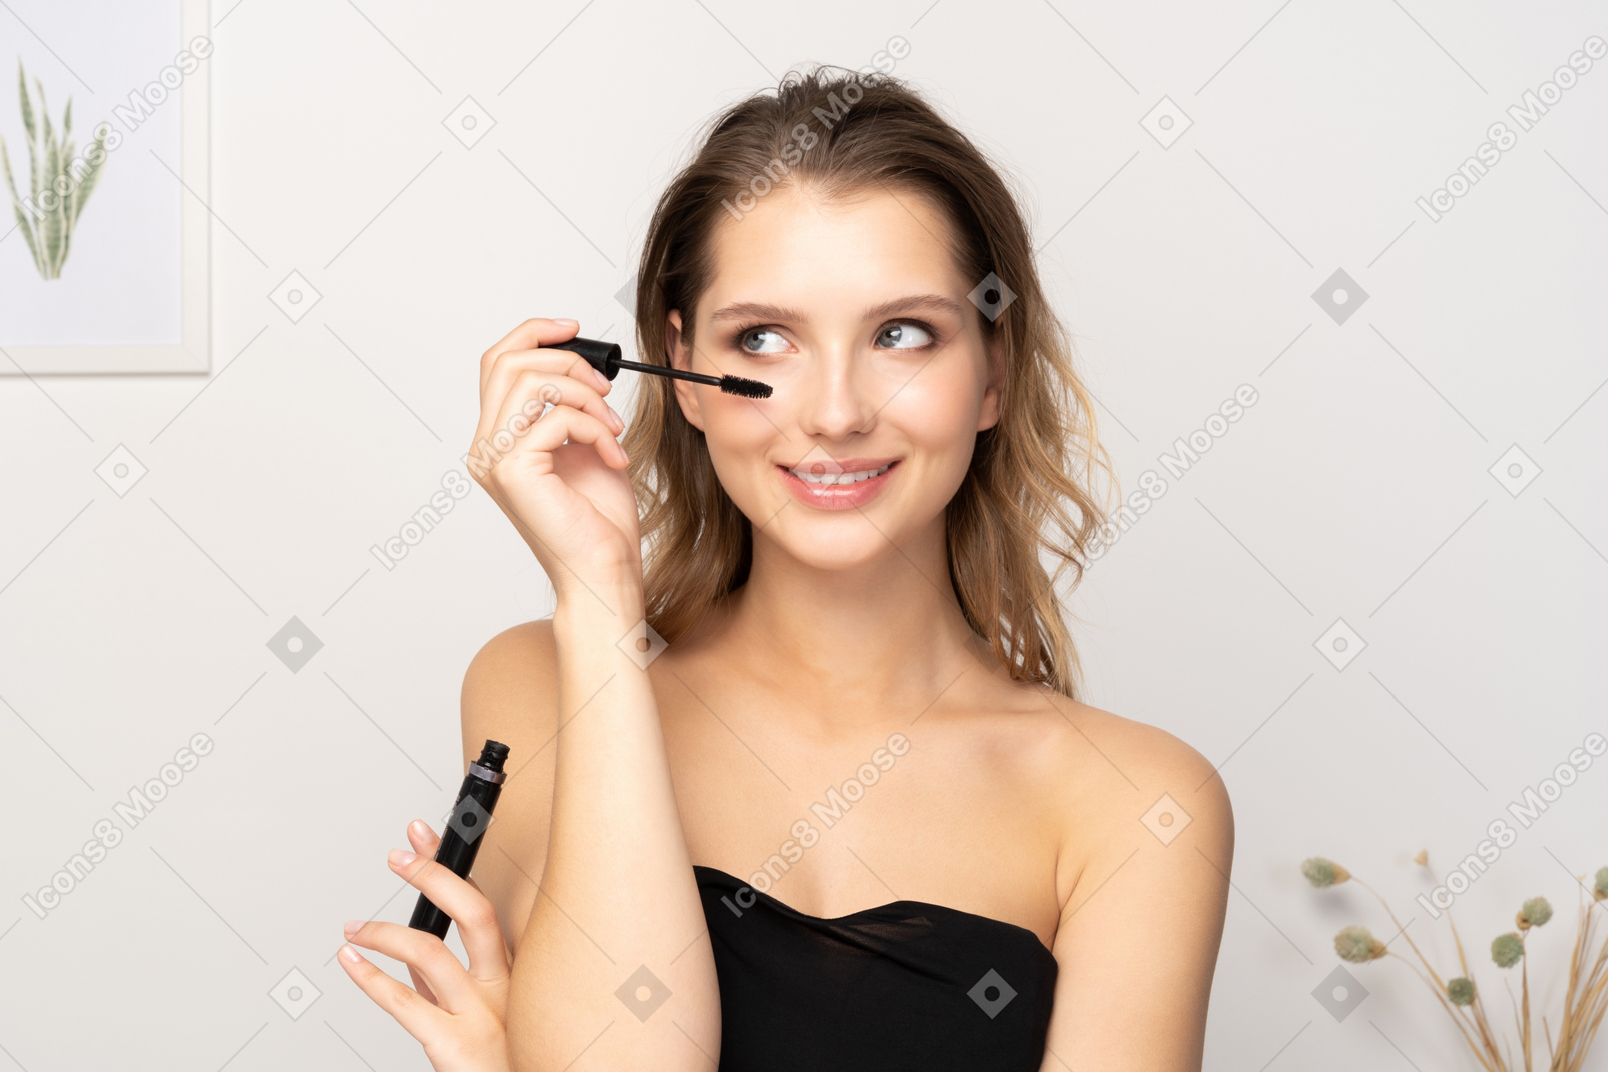 Front view of a smiling young woman wearing black top applying mascara